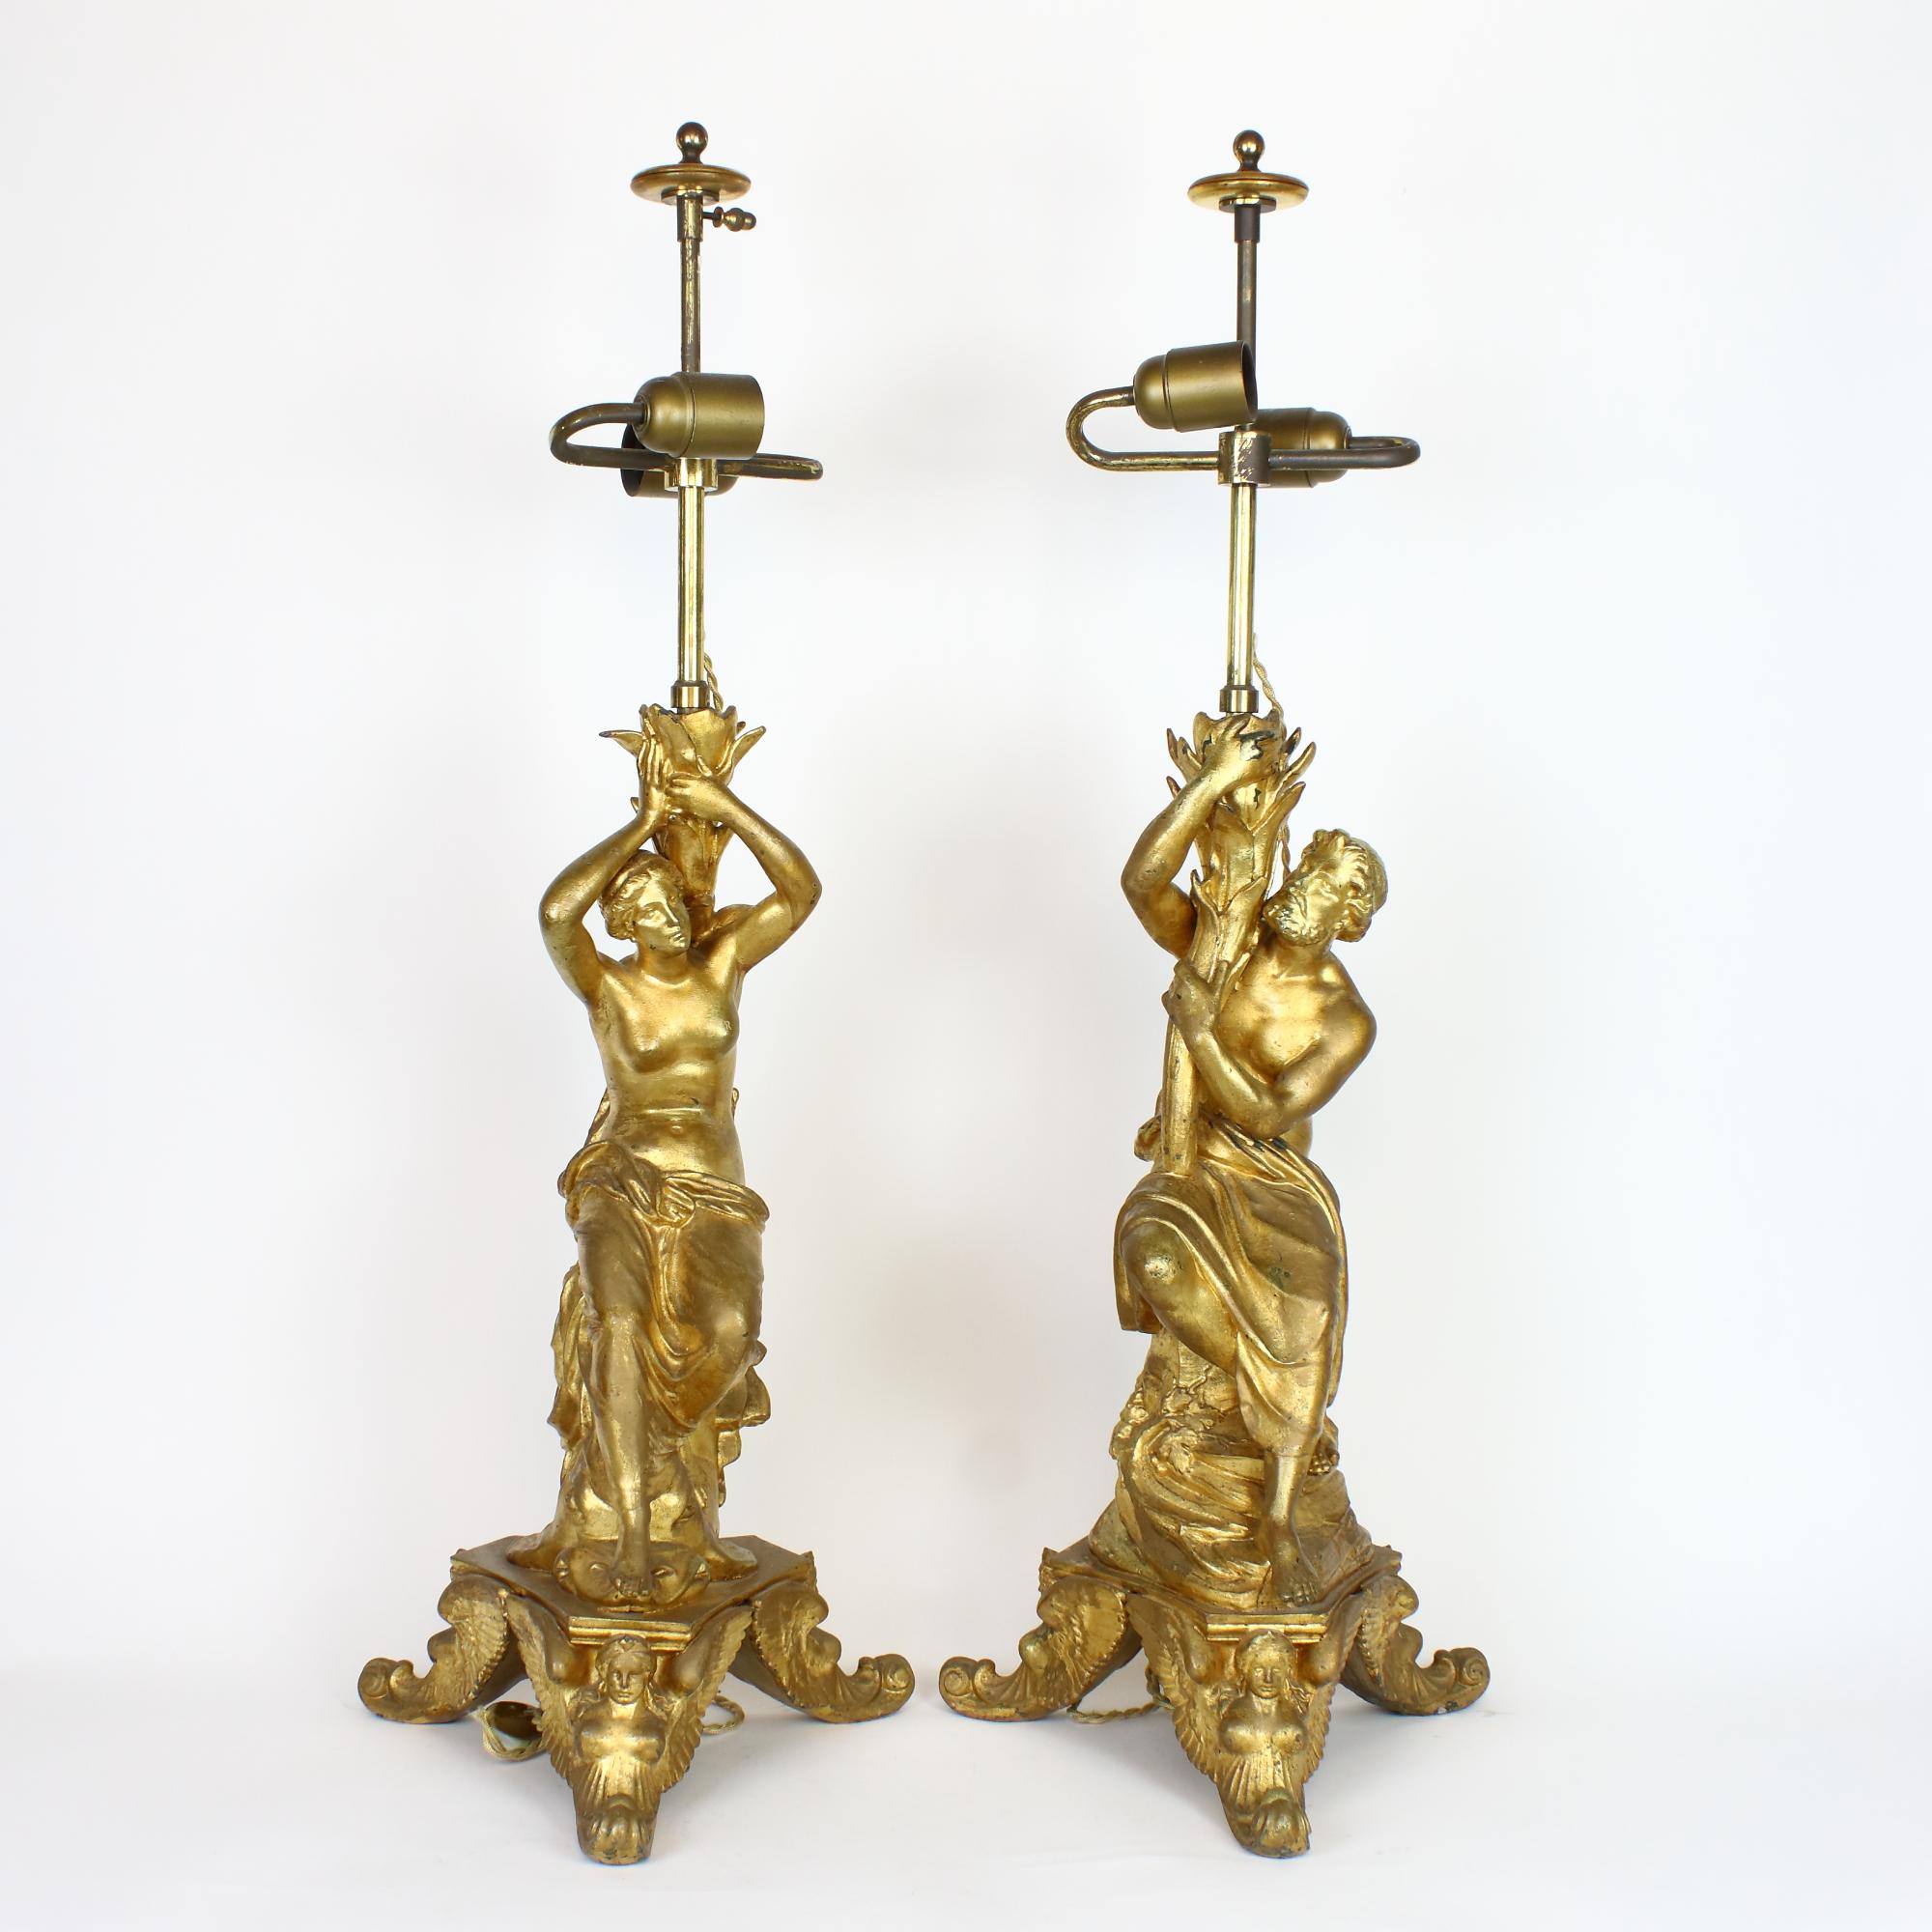 Rare Pair of 19th Century Italian Baroque Style Mythological Figures table lamps

The tripod bases with scroll feet featuring classical sphinx figures each carry a male and female mythological figure: the scantily clad female sitting on a dolphin,